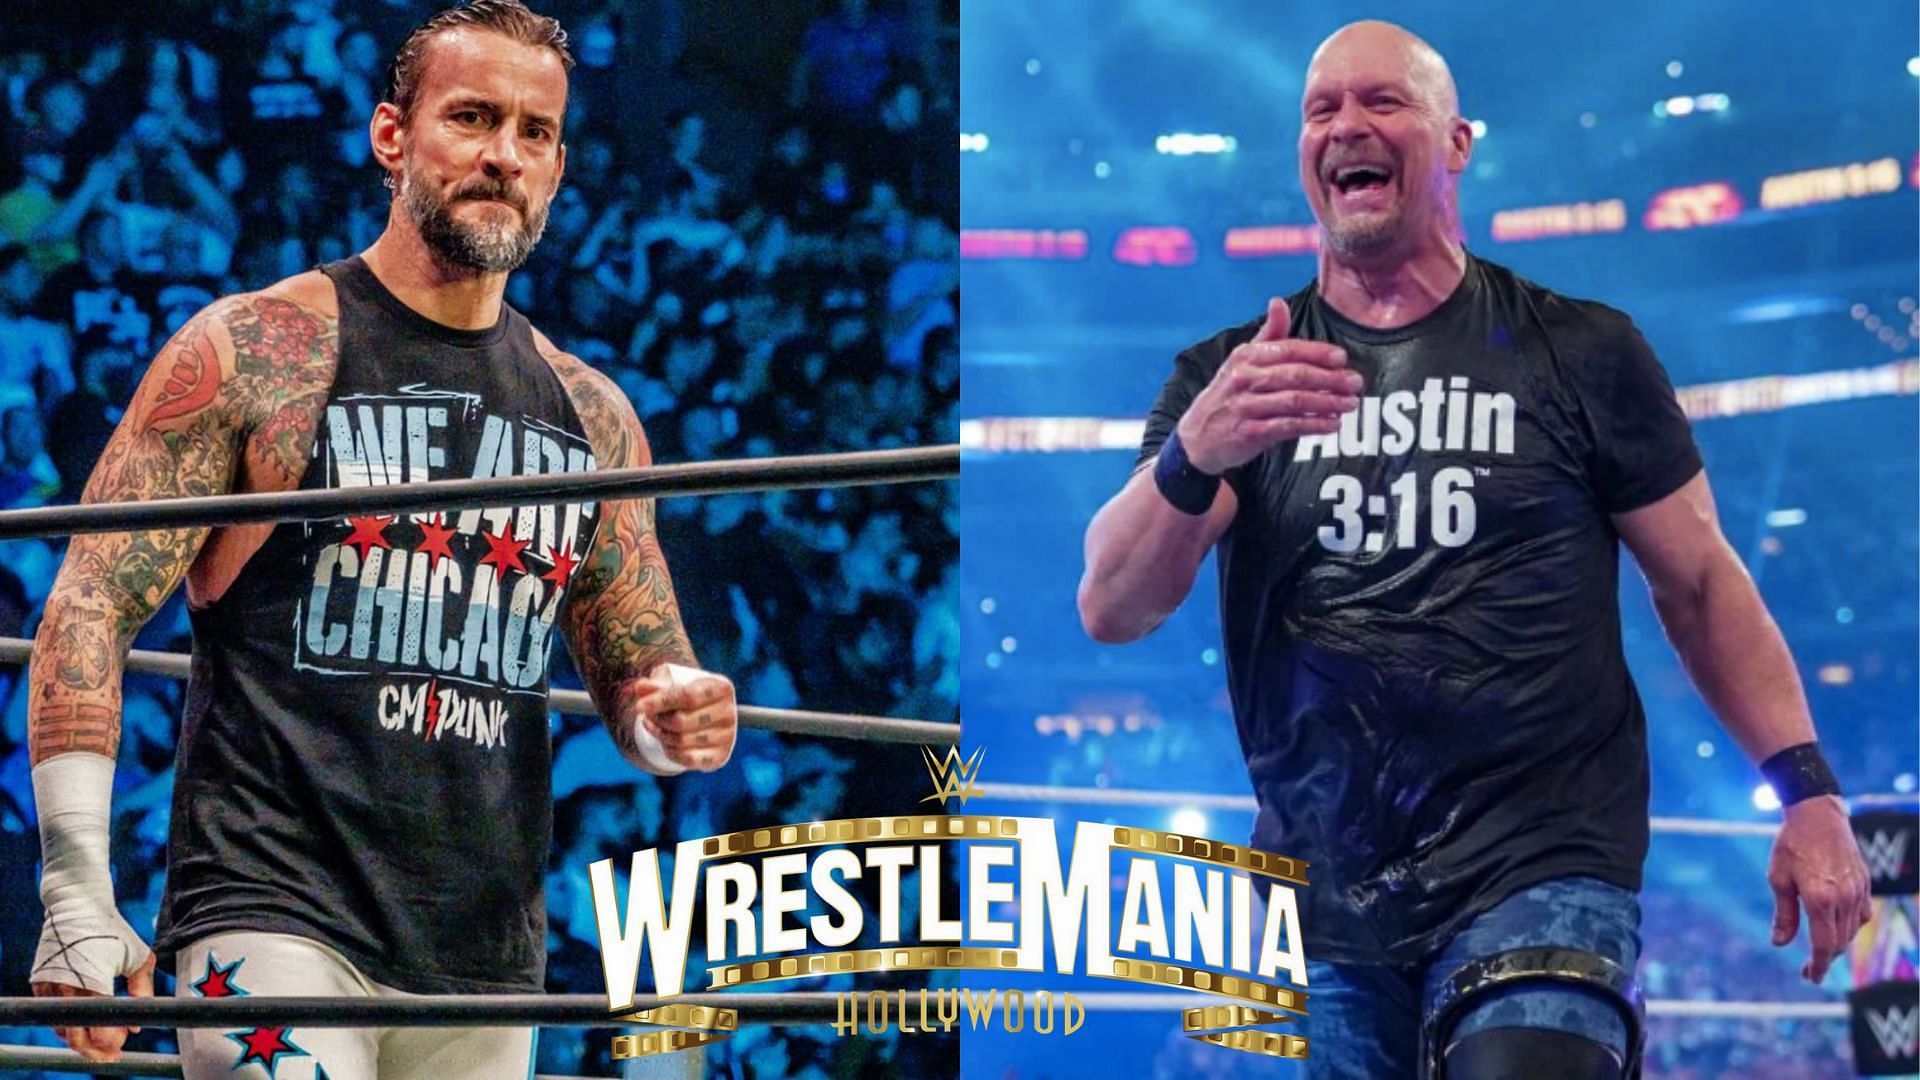 CM Punk vs Stone Cold would be a WrestleMania dream match